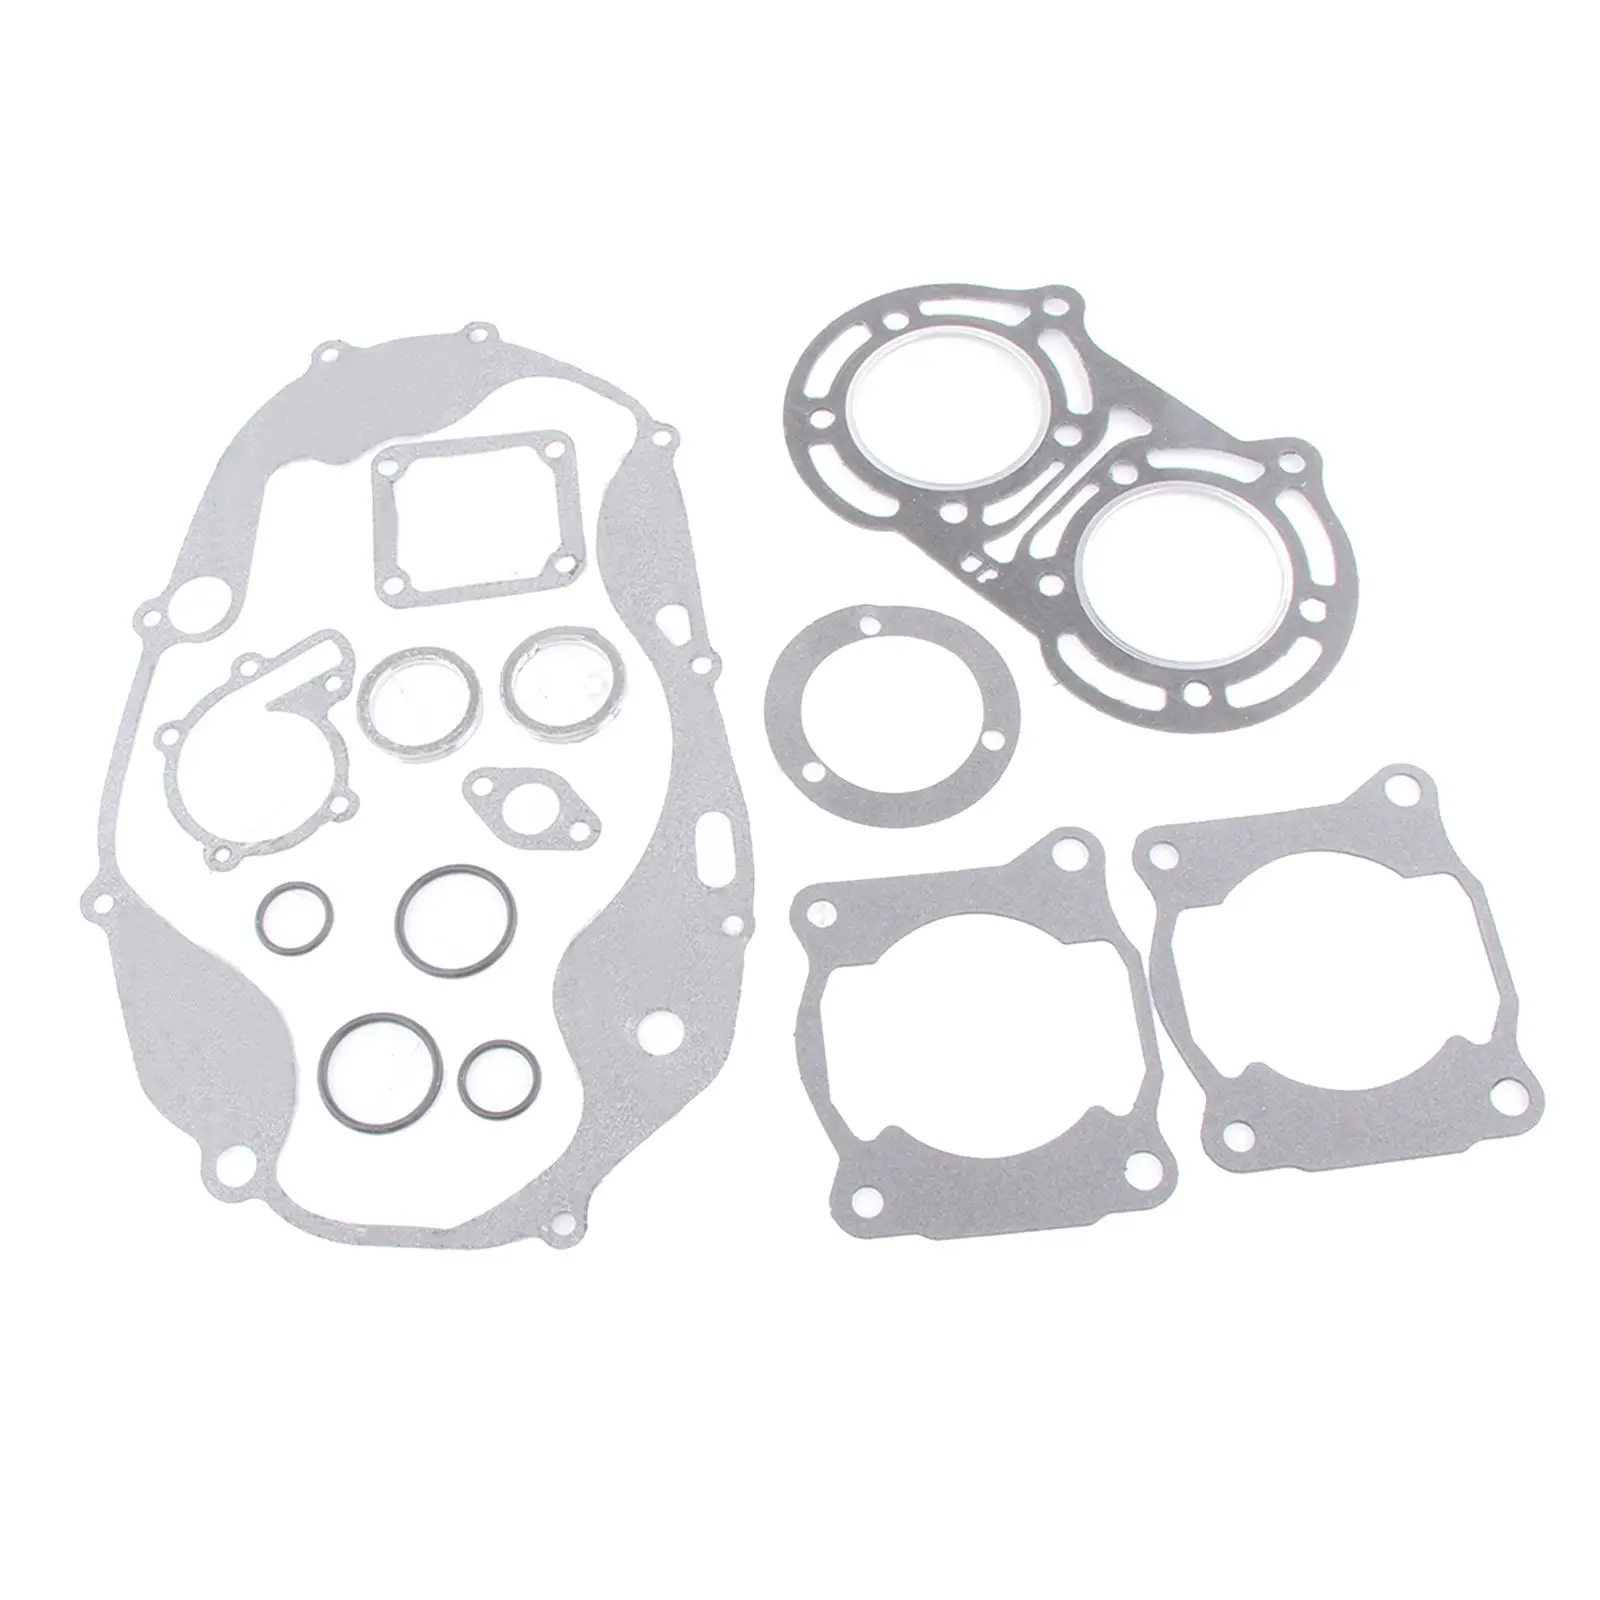 New Silver Replacement Complete Rebuild Engine Gasket Kit Full Set For Yamaha ATV YFZ350 Banshee 350 87-06 GS34